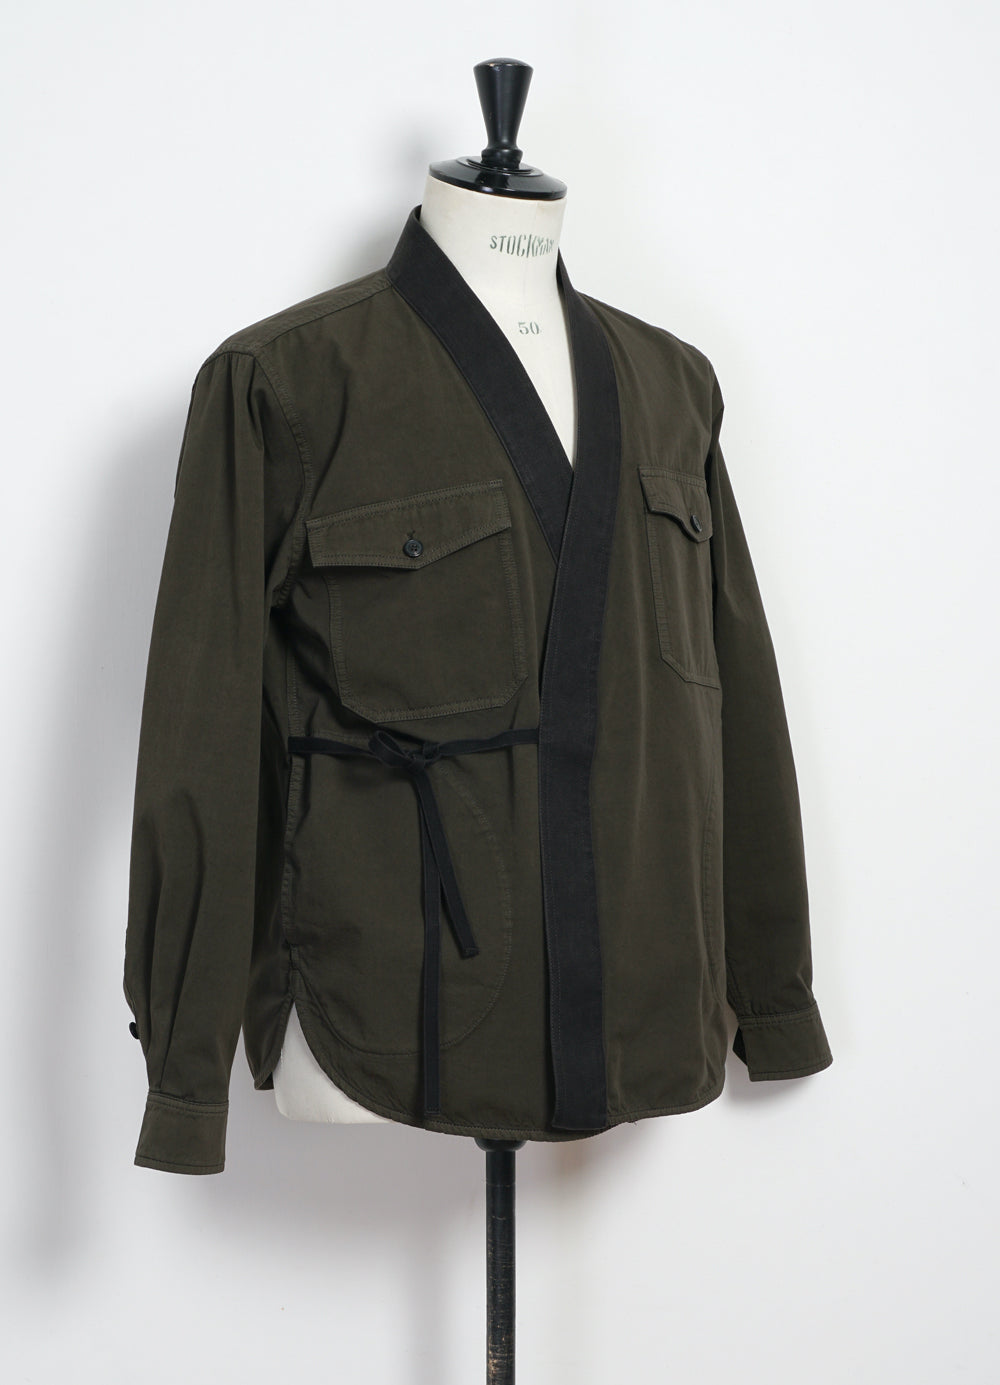 REMY | East & West Shirt Jacket | Olive Drill